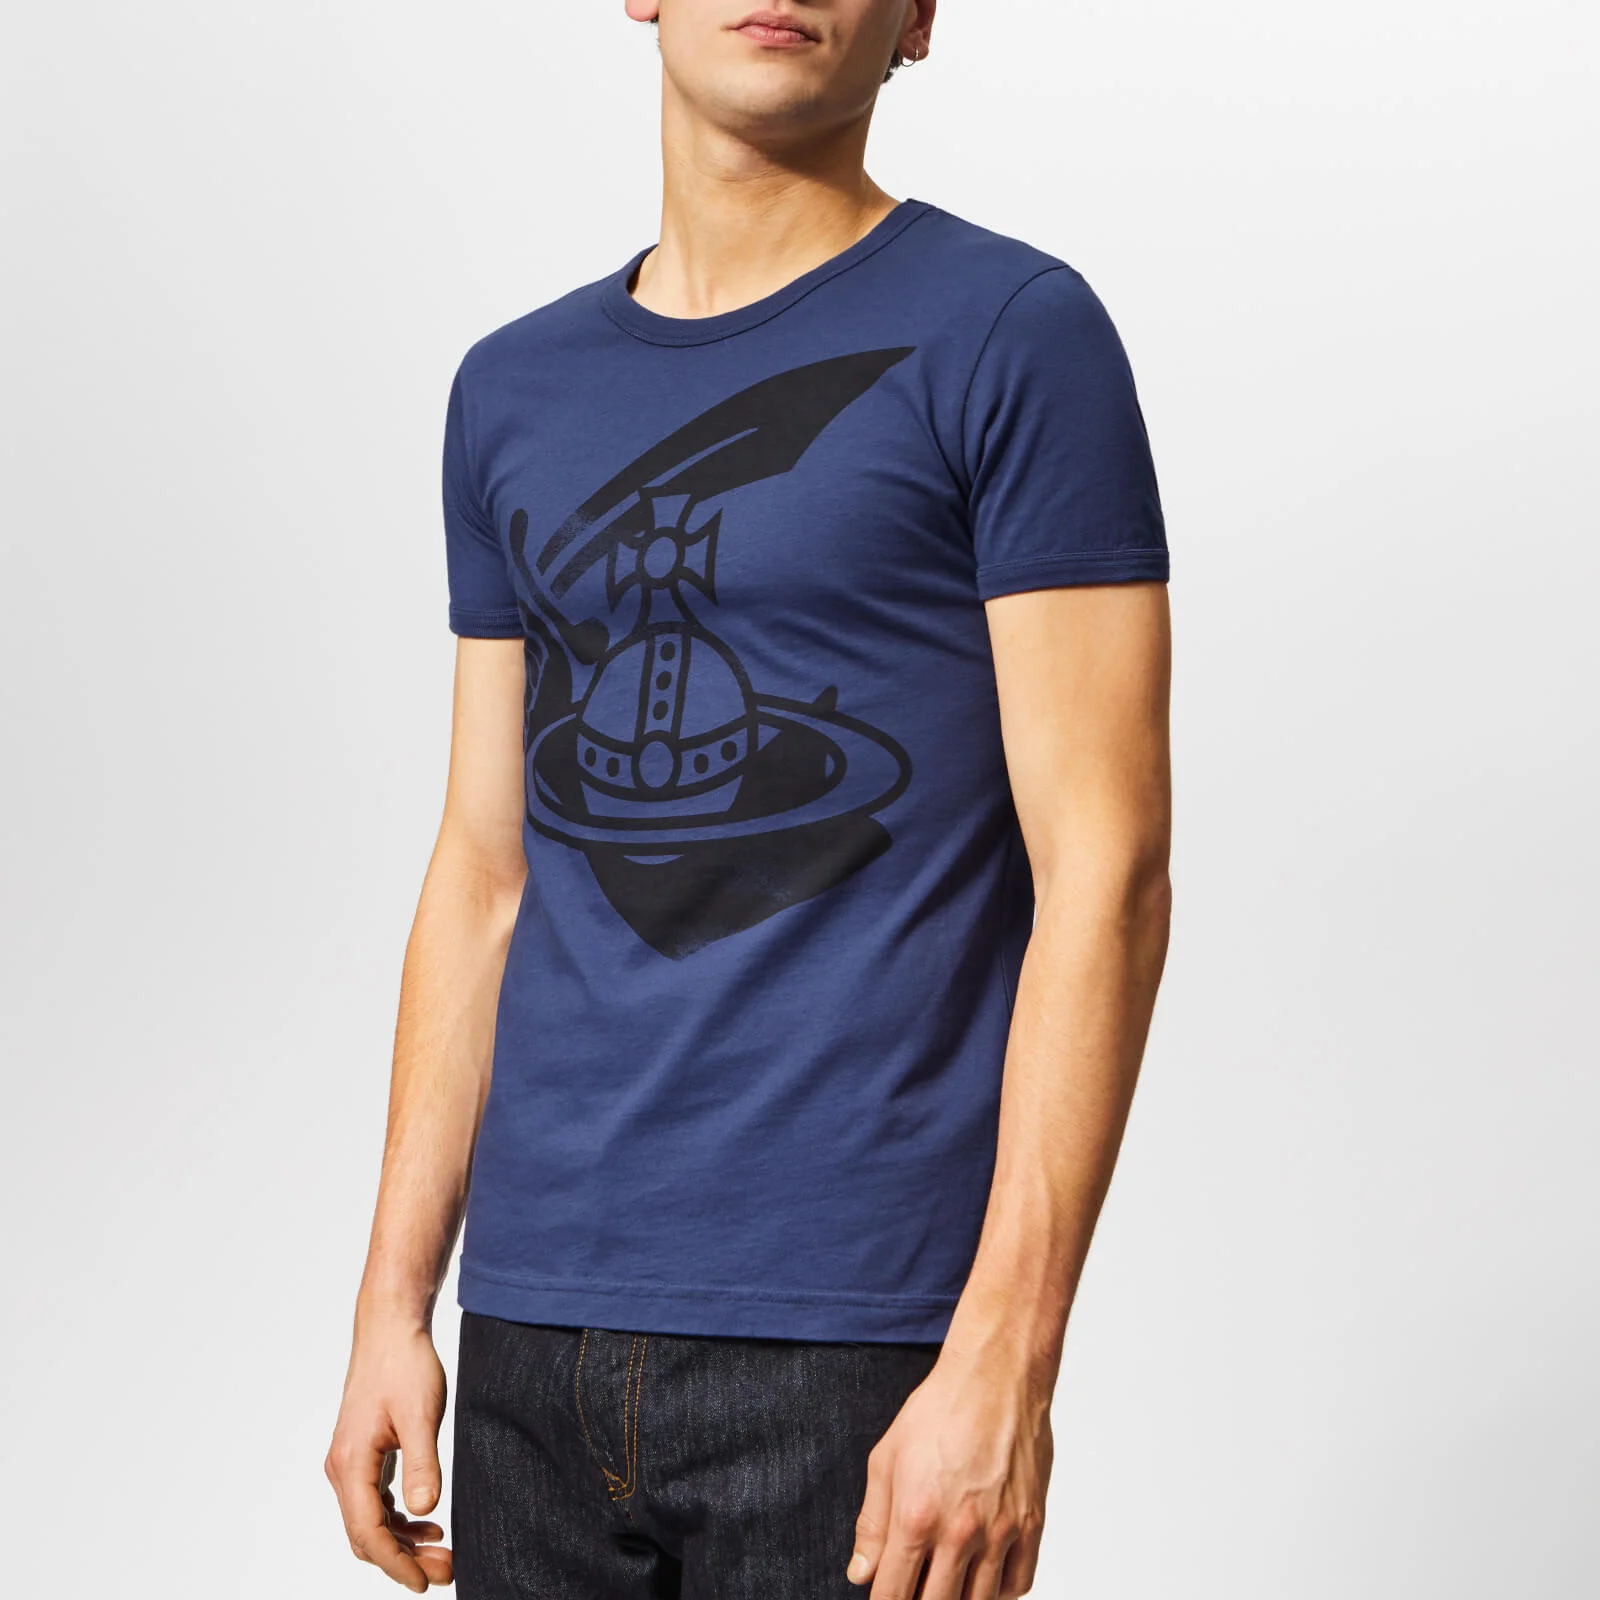 Vivienne Westwood Anglomania Men's Classic T-Shirt - Navy Image 1